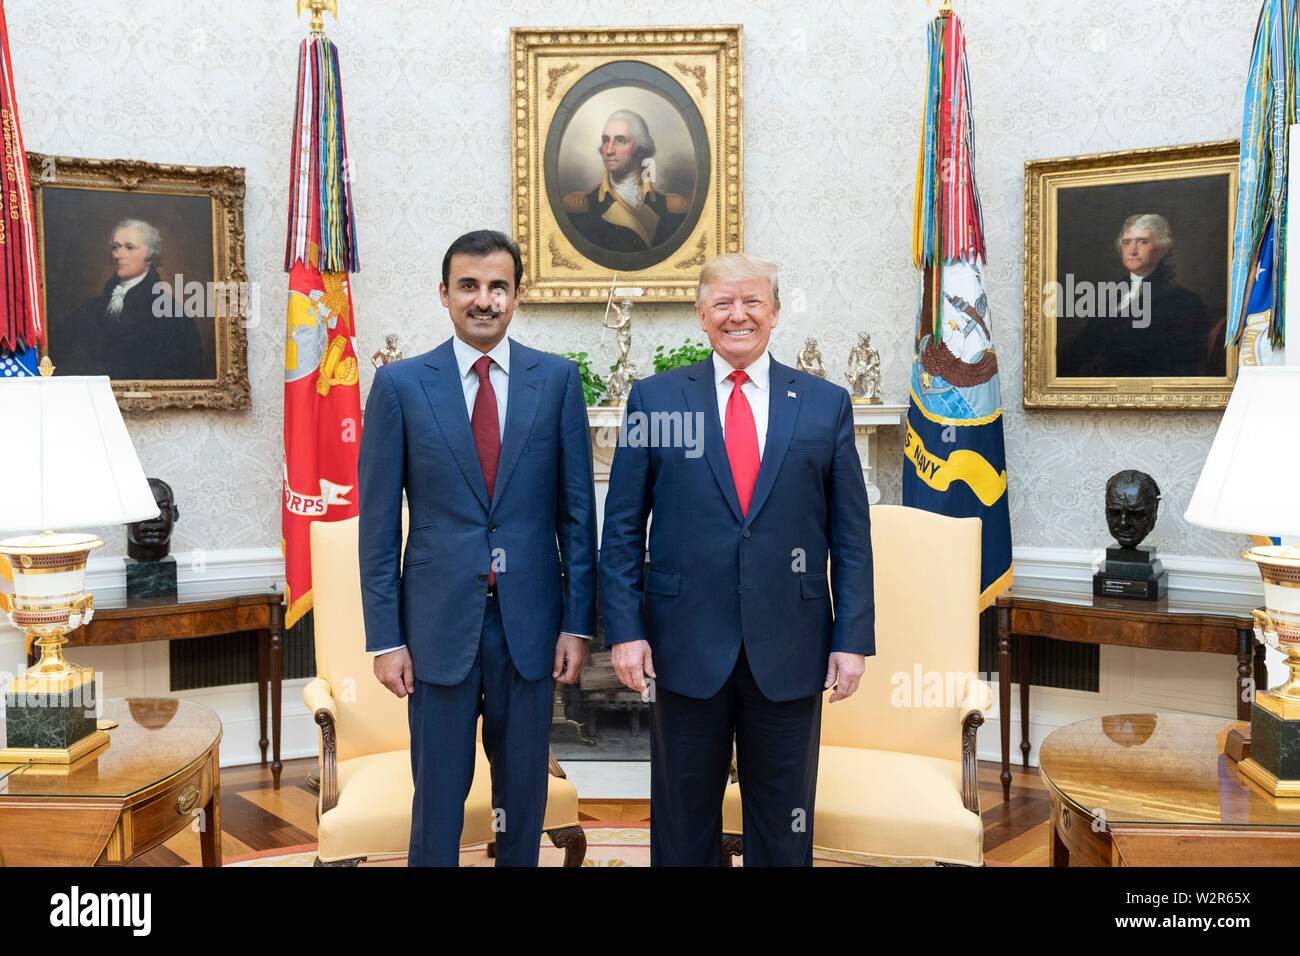 U.S President Donald Trump poses with the Emir of Qatar Tamin bin Hamad Al Thani before the start of their bilateral meeting in the Oval Office of the White House July 9, 2019 in Washington, DC. Stock Photo